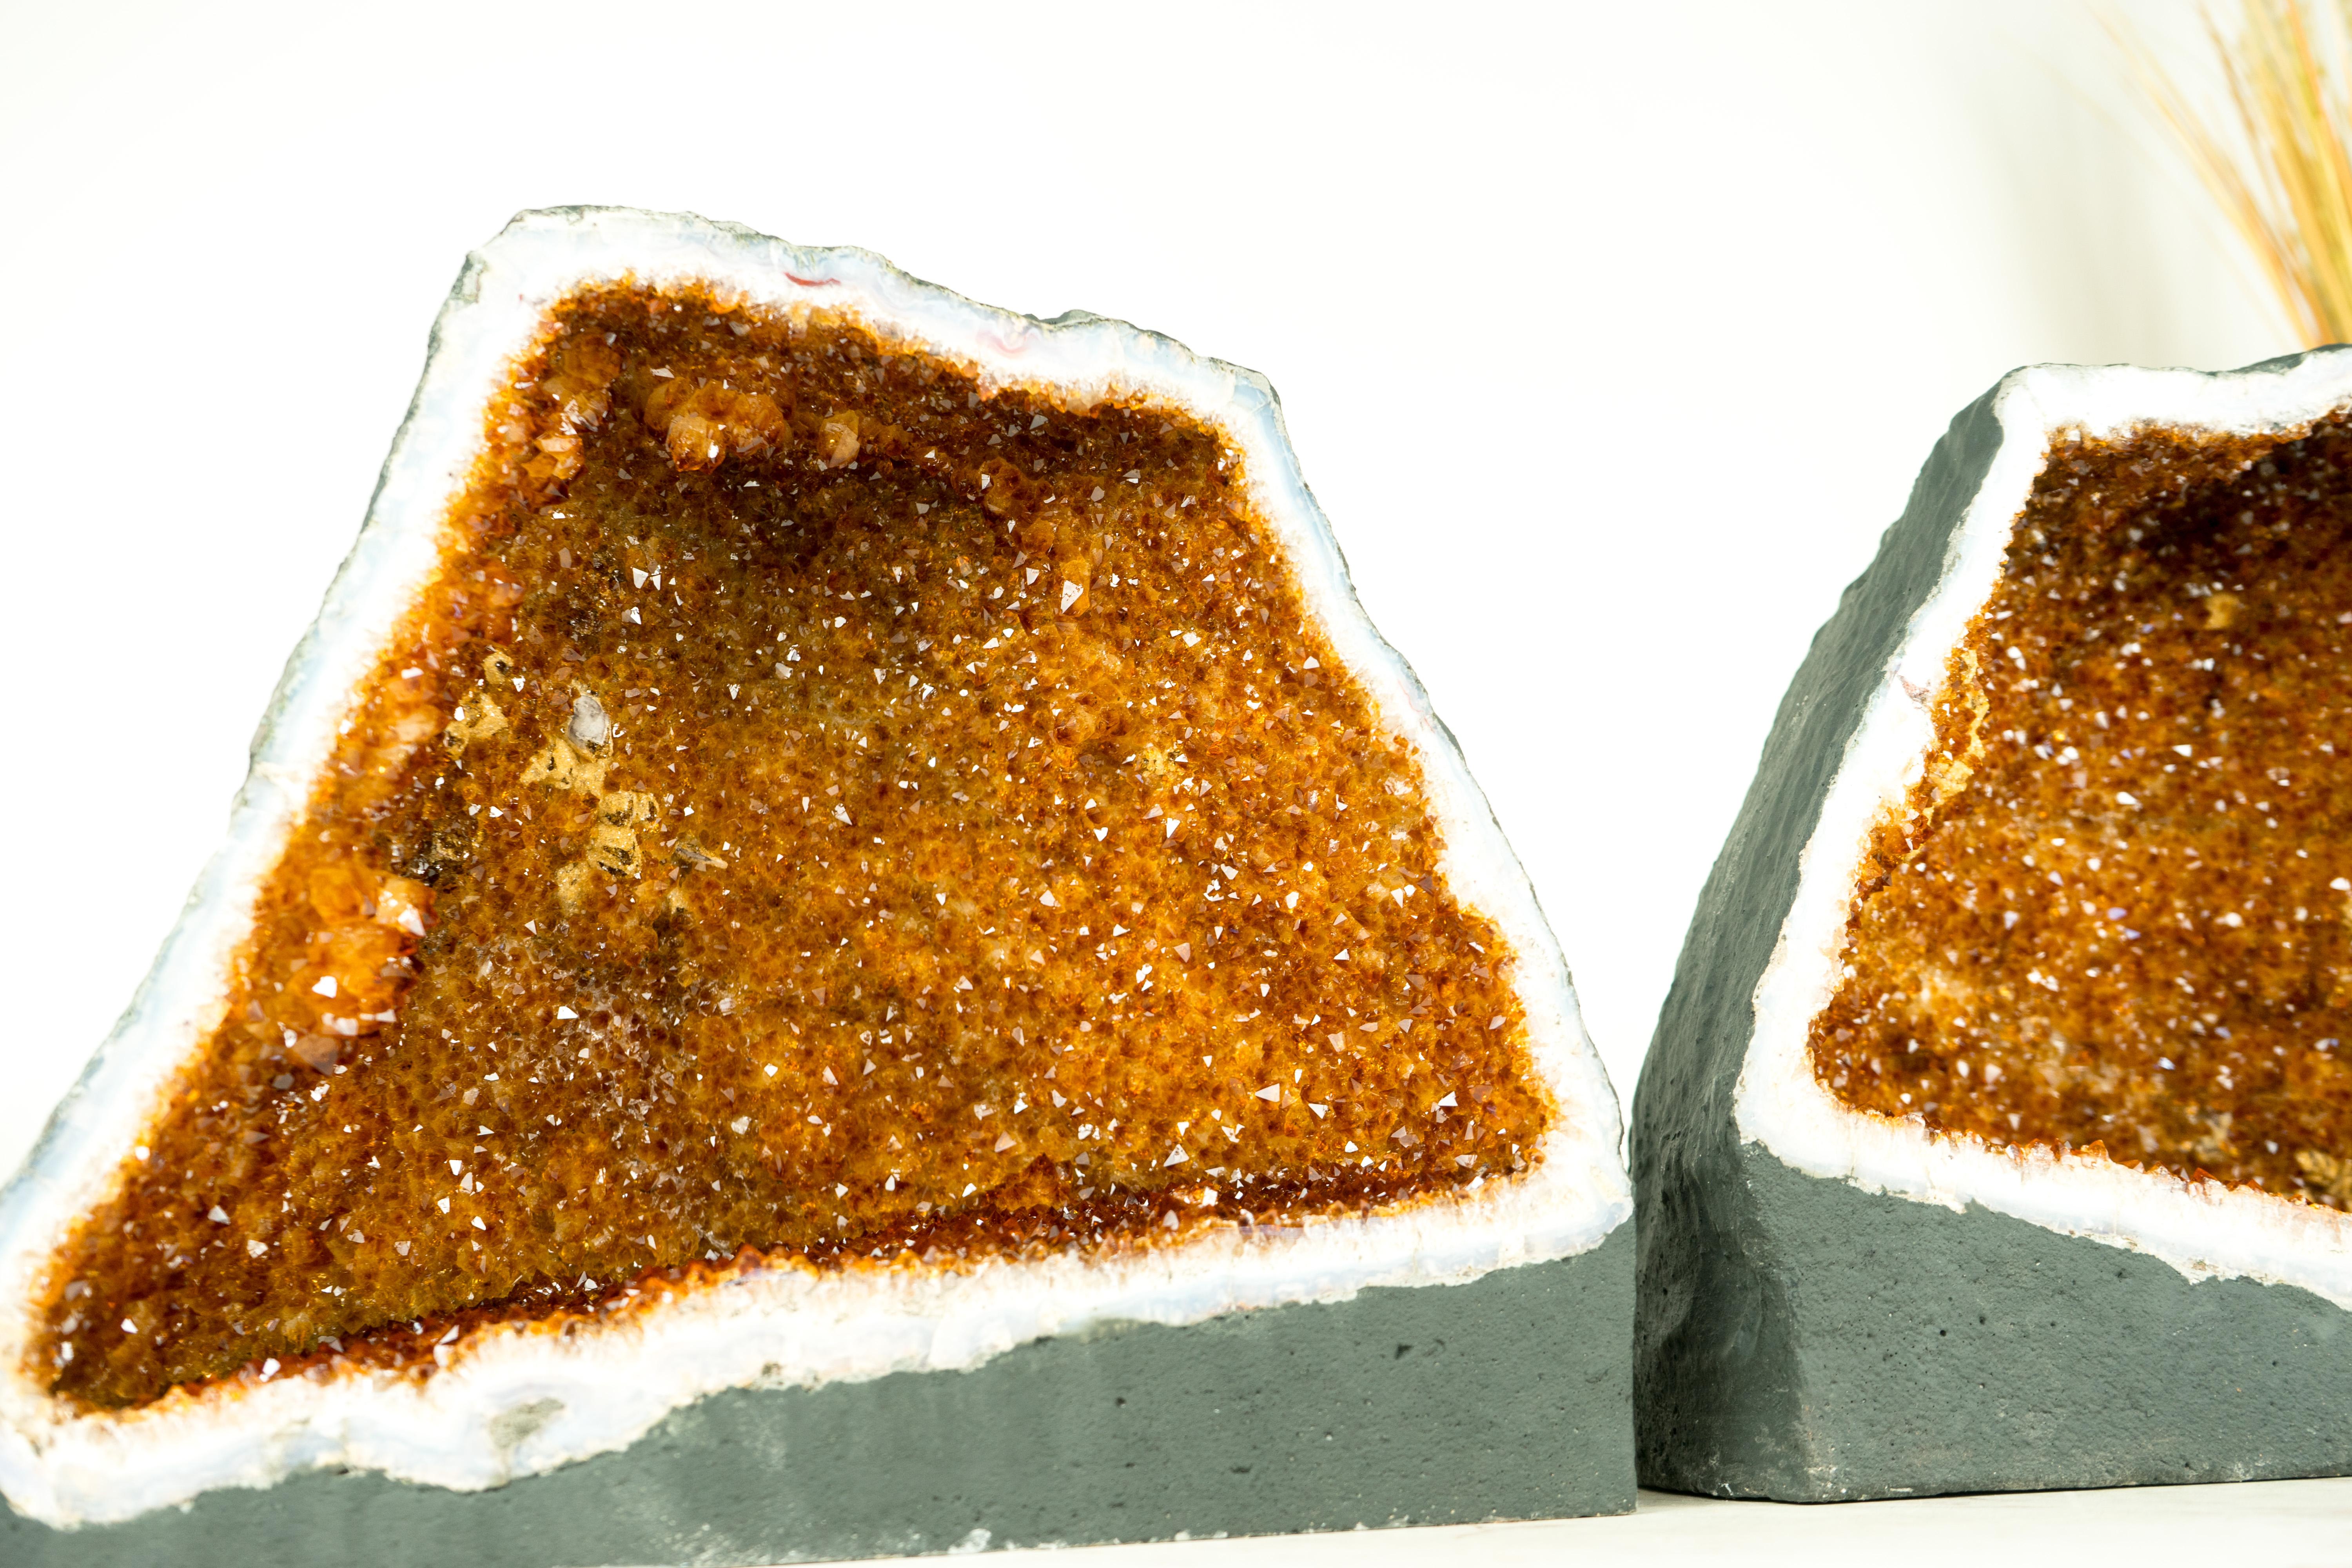 Brazilian Pair of Bookmatching Natural Citrine Geodes wit Top-Grade Saturated Orange For Sale